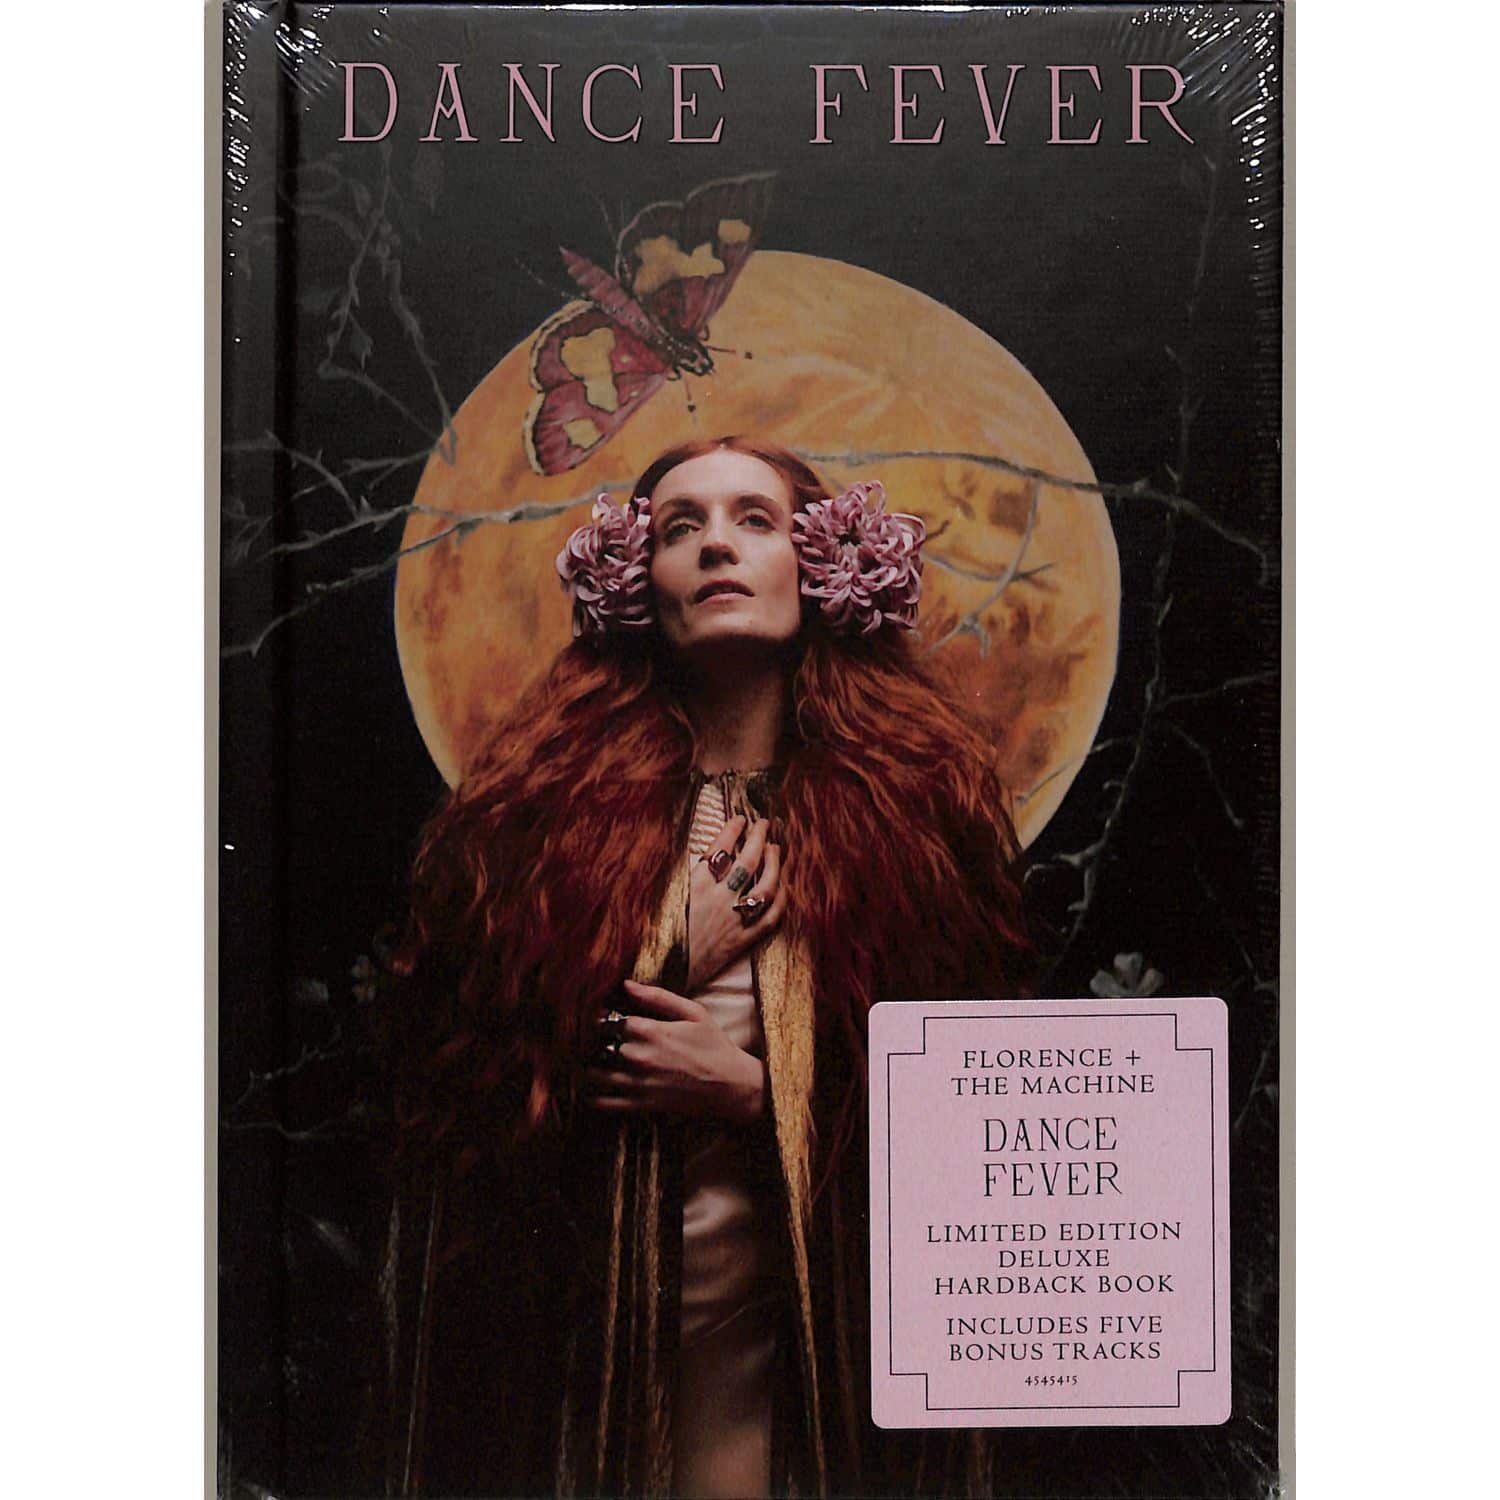 Florence+The Machine - DANCE FEVER 